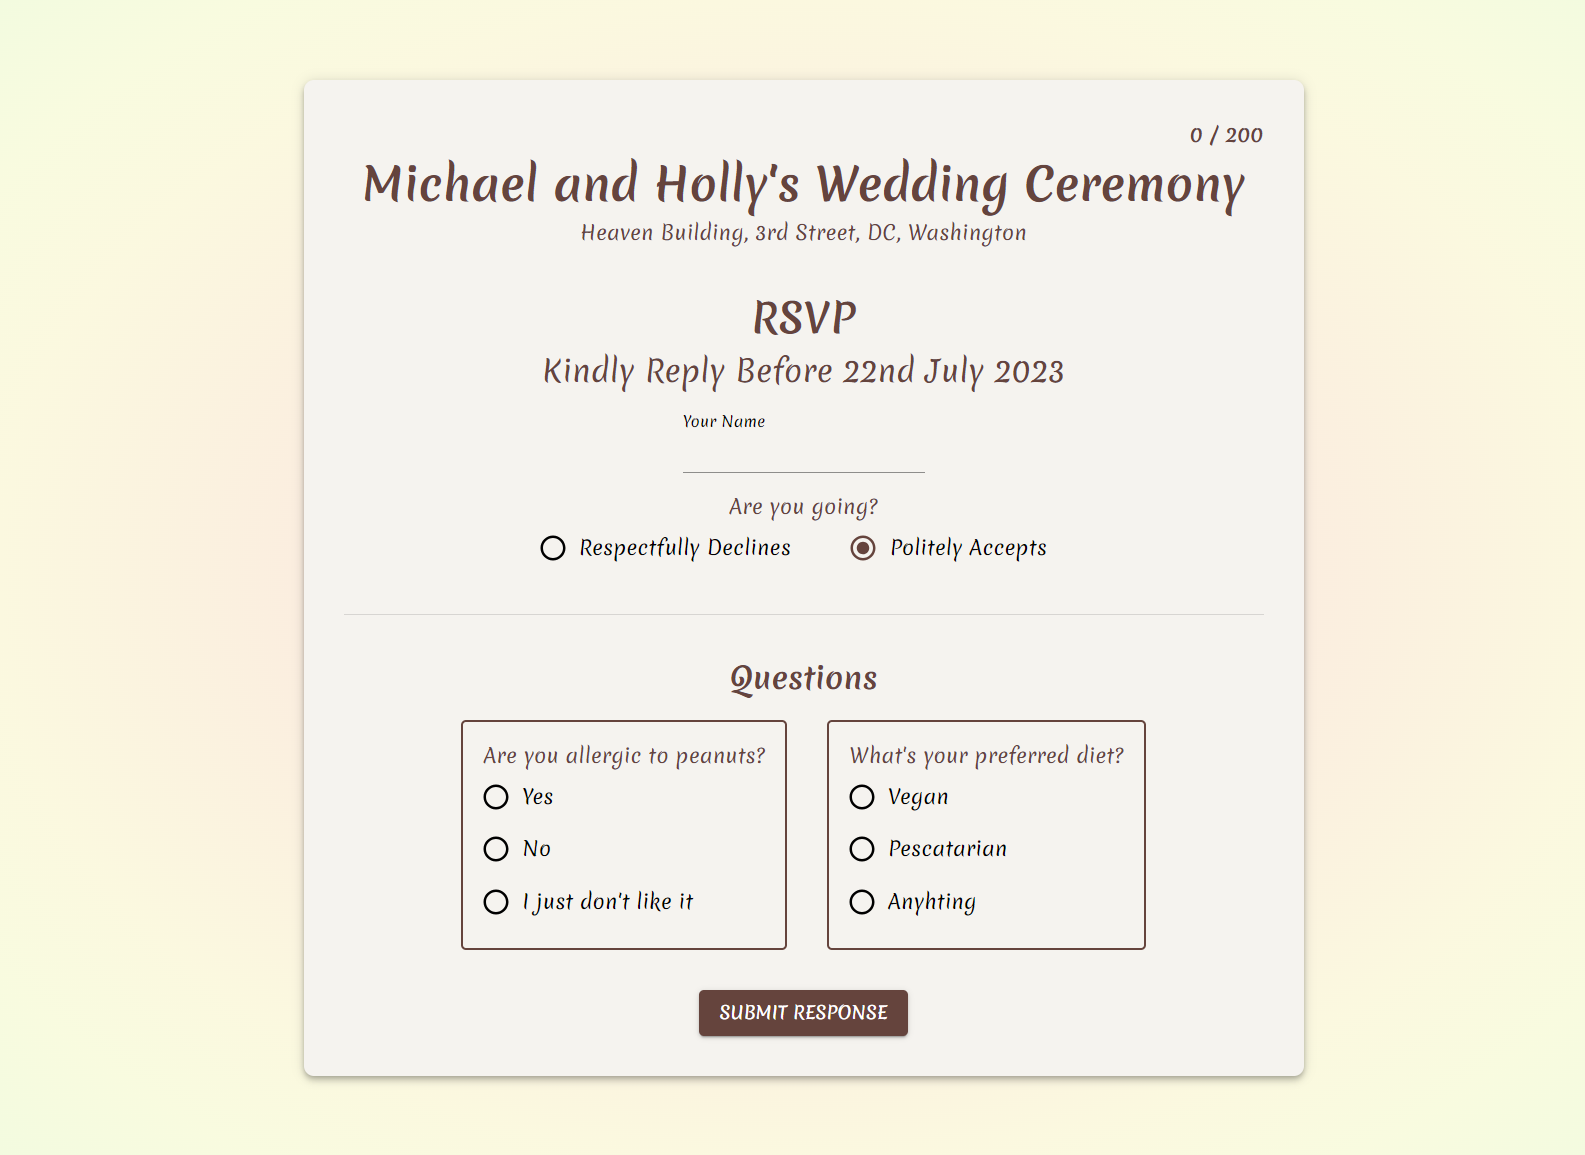 RSVP View page